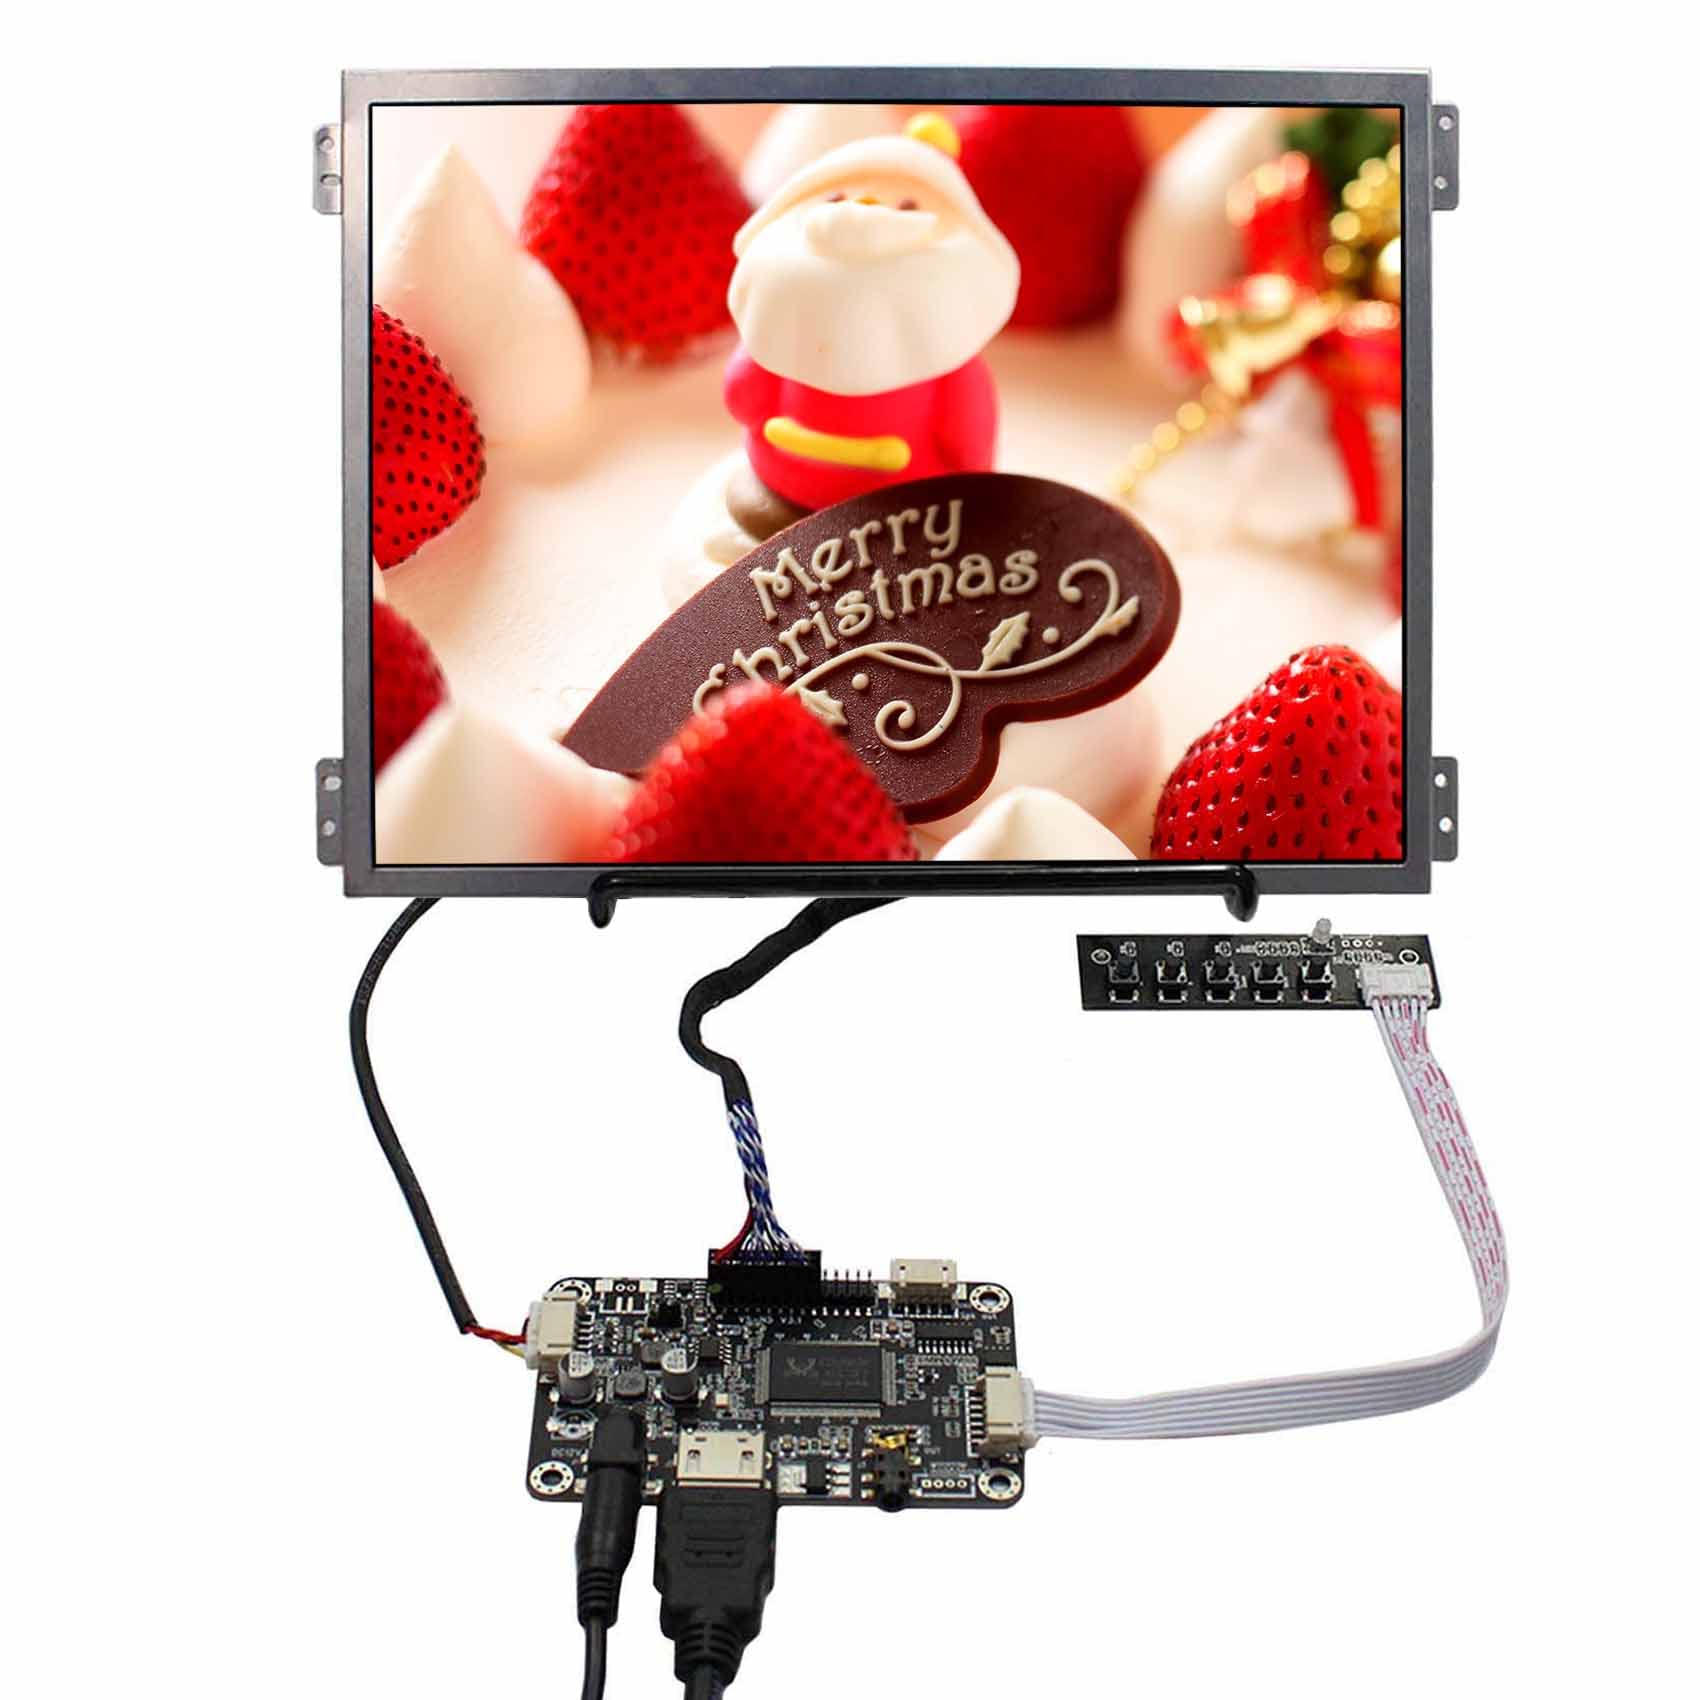 VSDISPLAY 10.4" 10.4 Inch 1024x768 600nit IPS LCD Screen VS104T-004A with HD-MI Audio LCD Controller Board